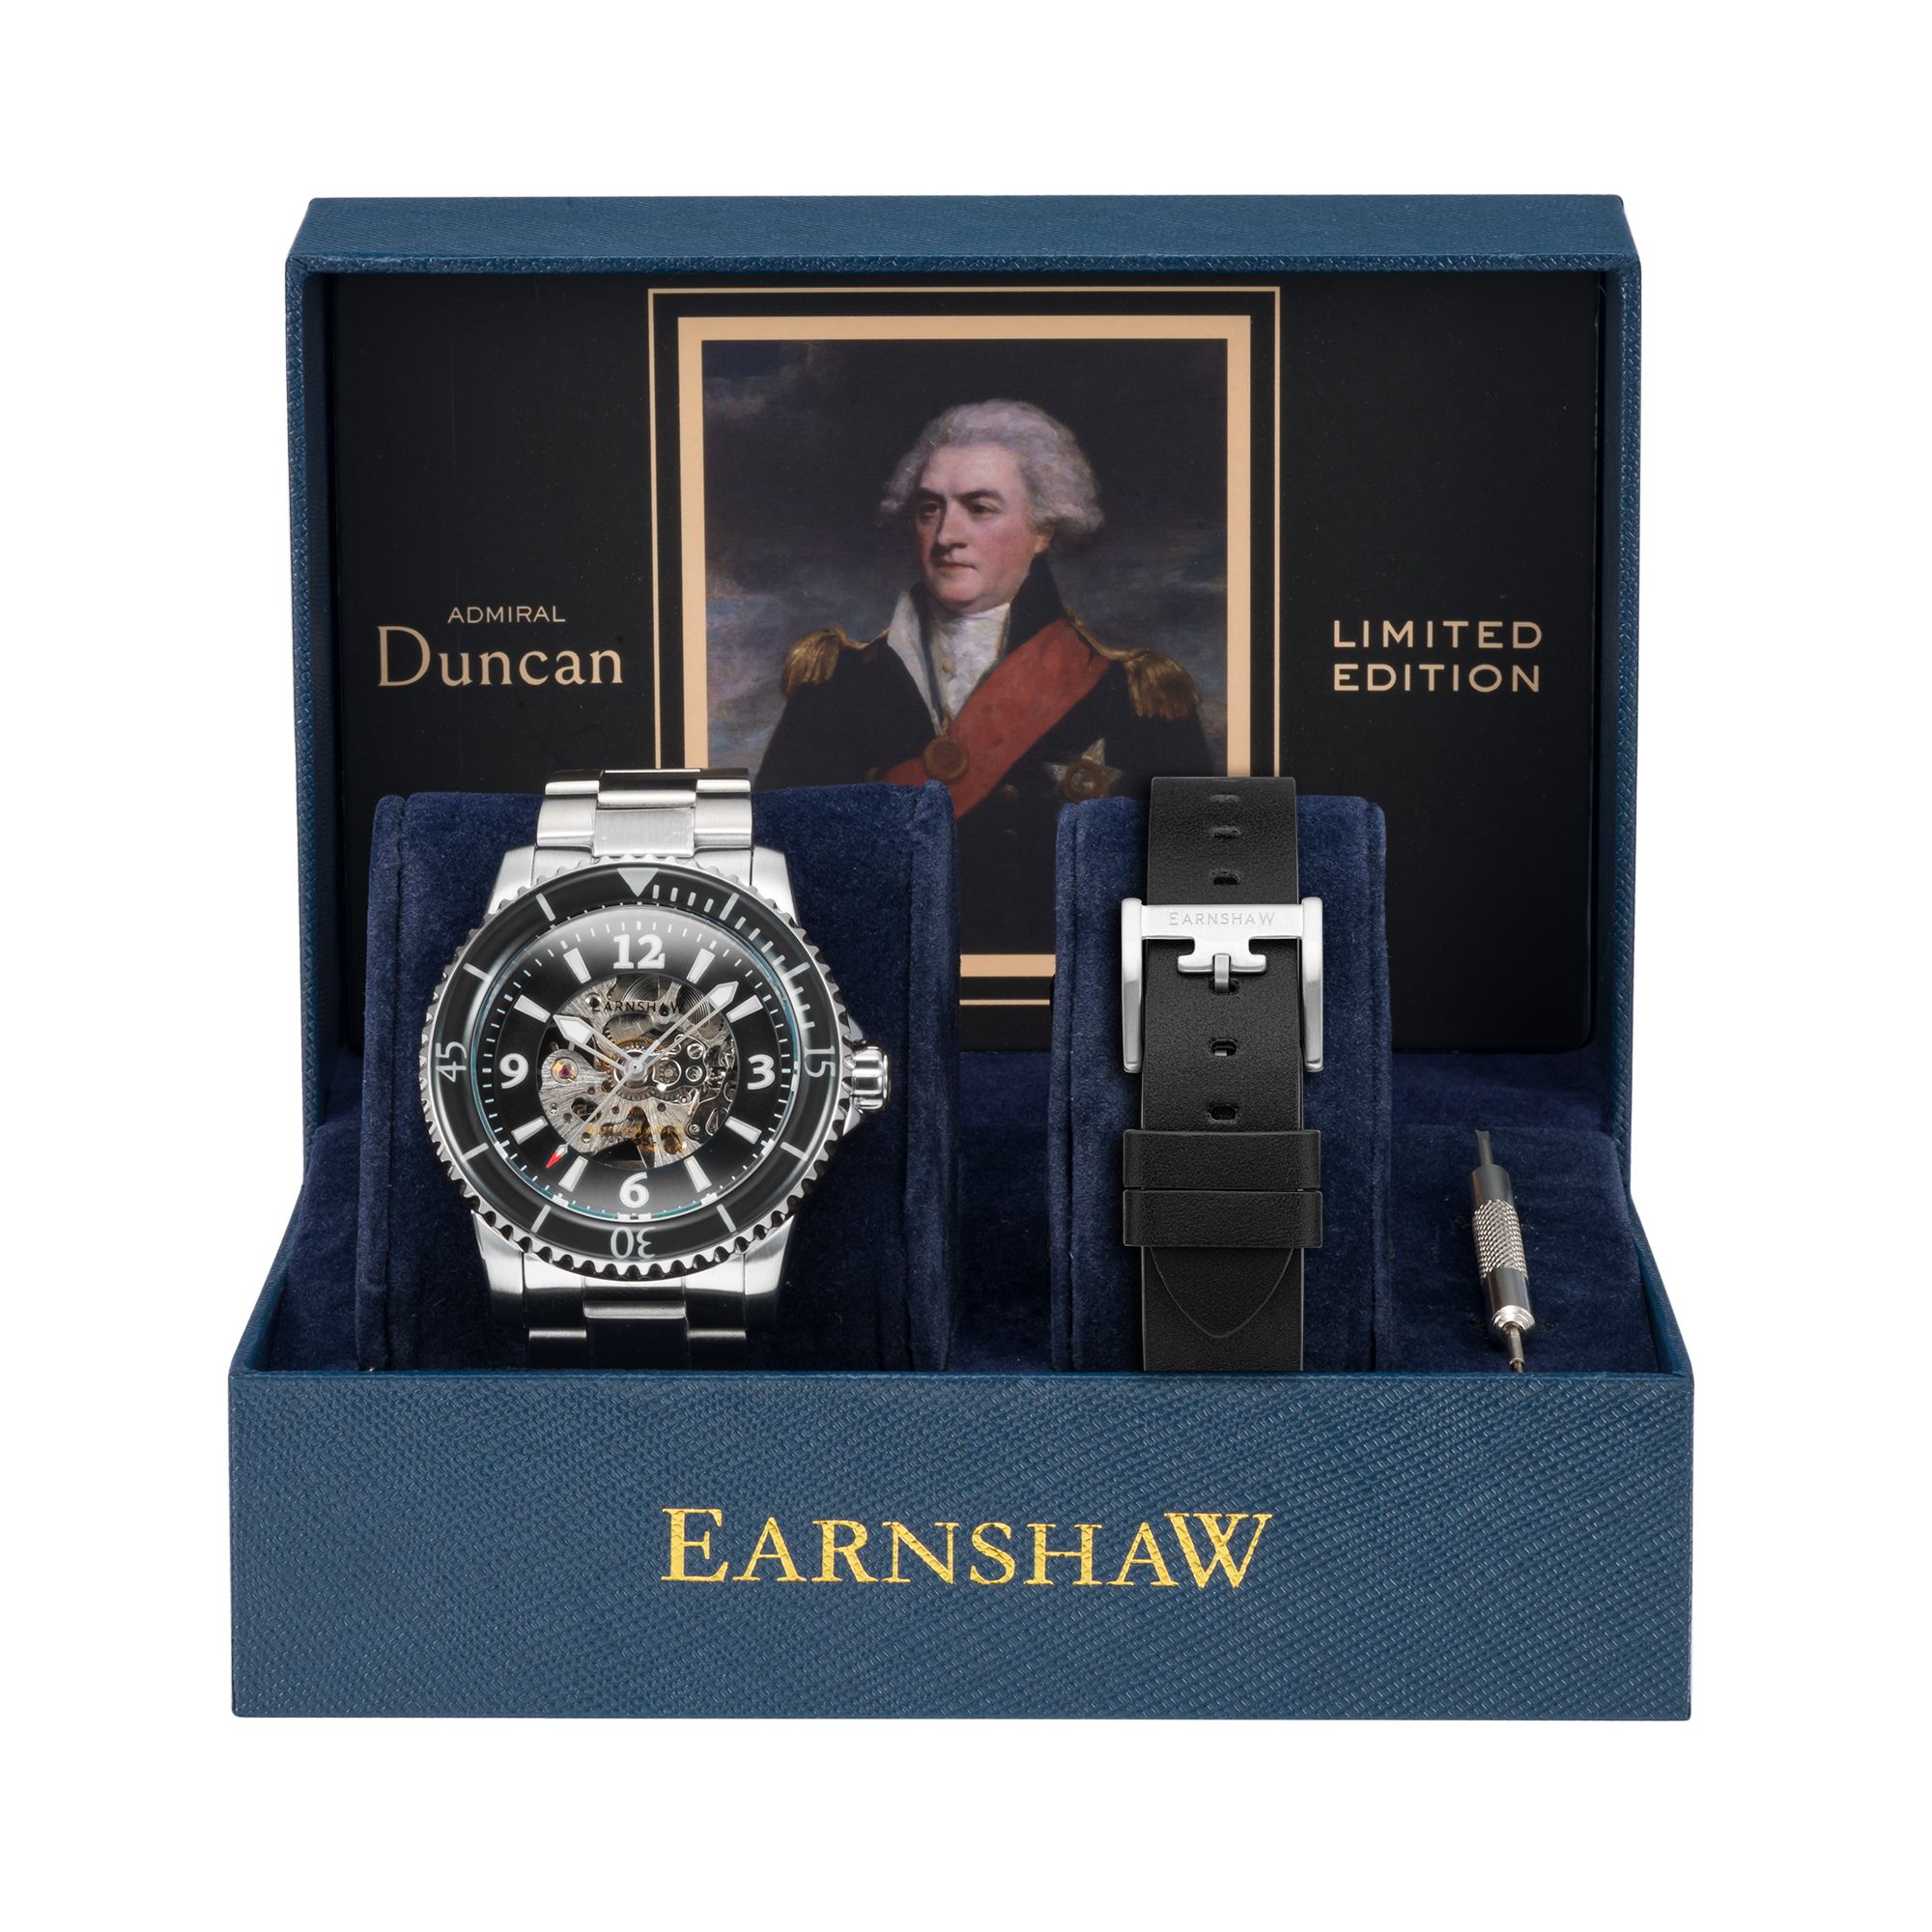 Thomas Earnshaw 43mm Men's Automatic Watch ADMIRAL LIMITED EDITION ES-8129-11